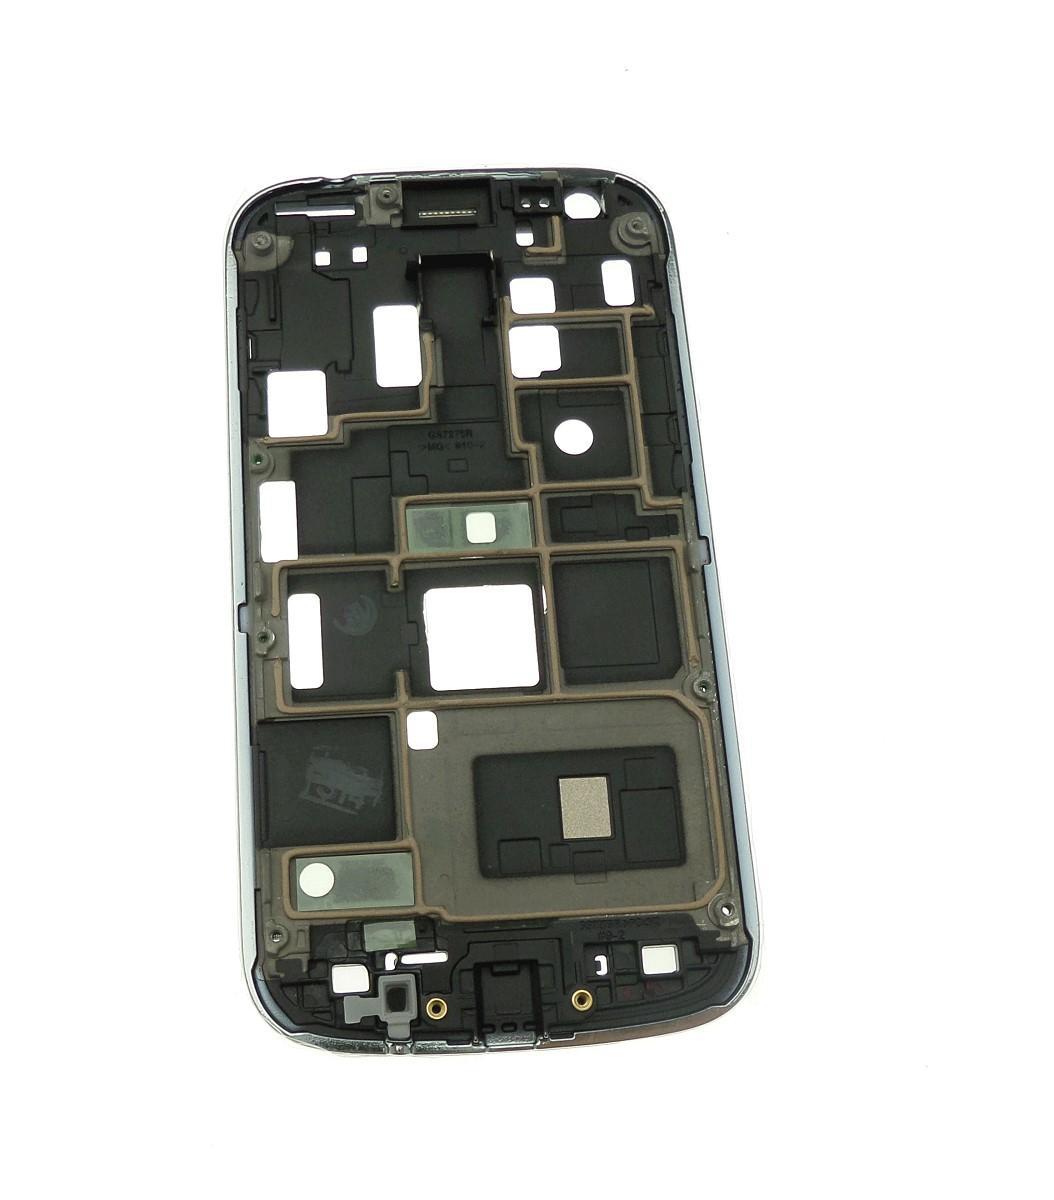 Chassis support du LCD Samsung Galaxy Ace 3 S7572 S7275r